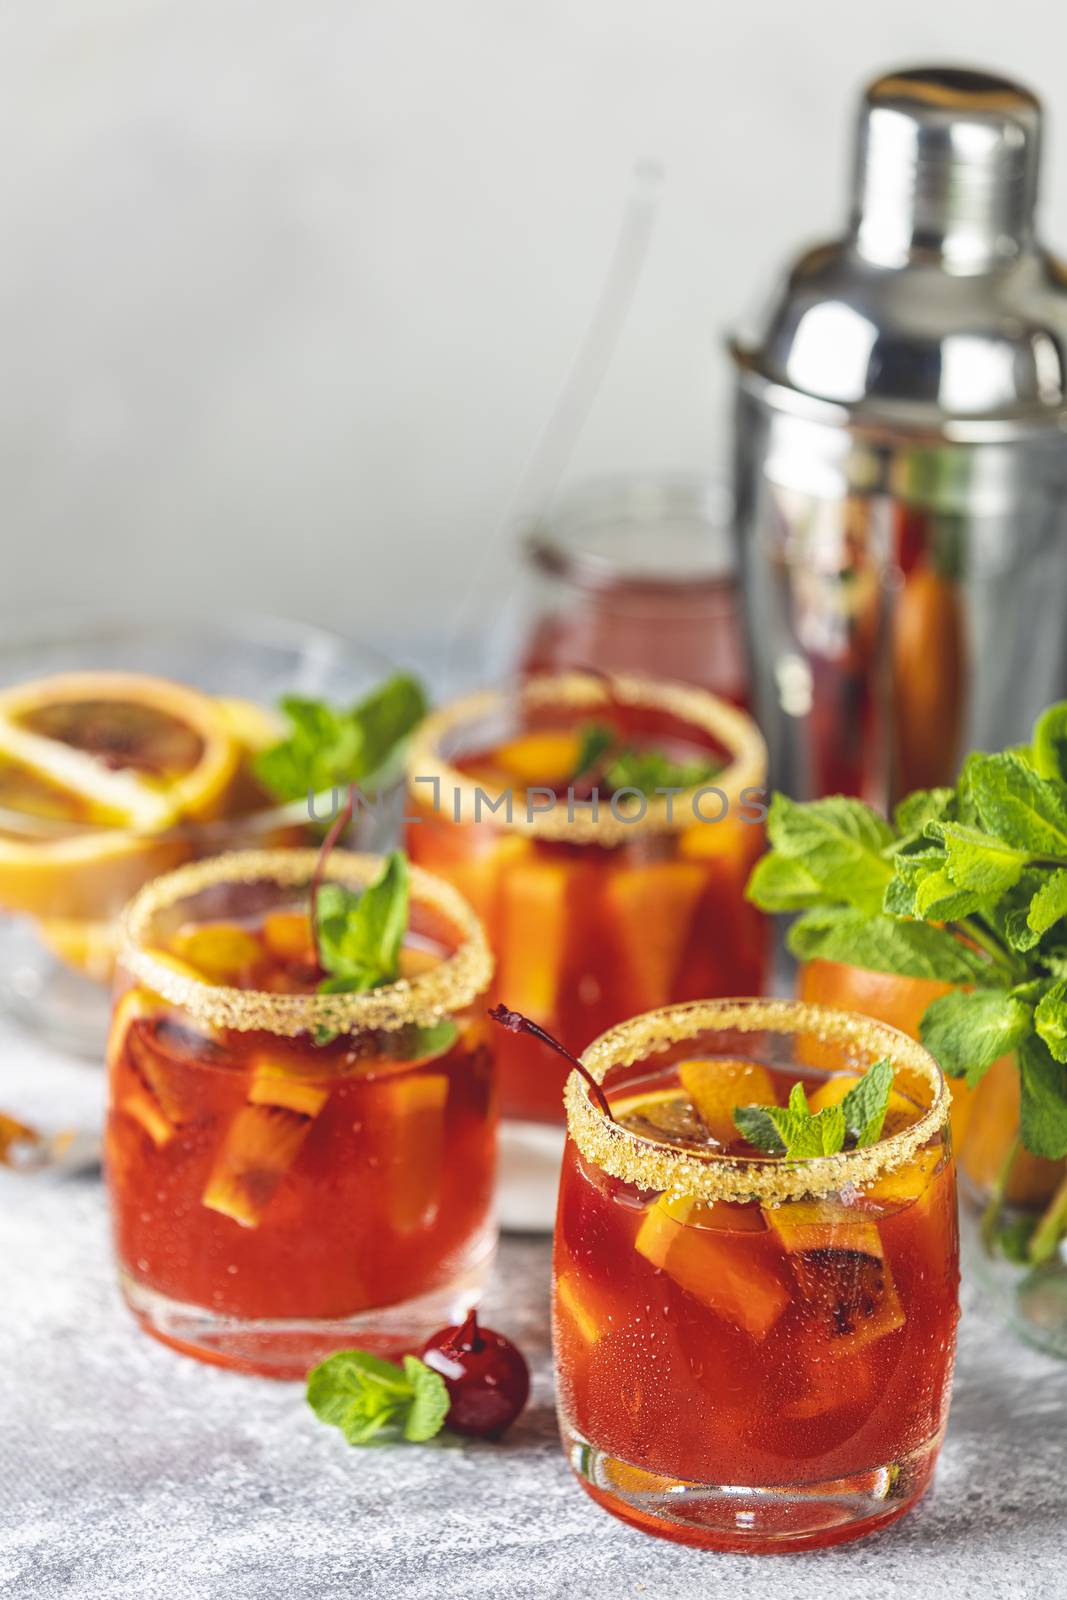 Italian aperol spritz cocktail with orange slices and ingredient by ArtSvitlyna